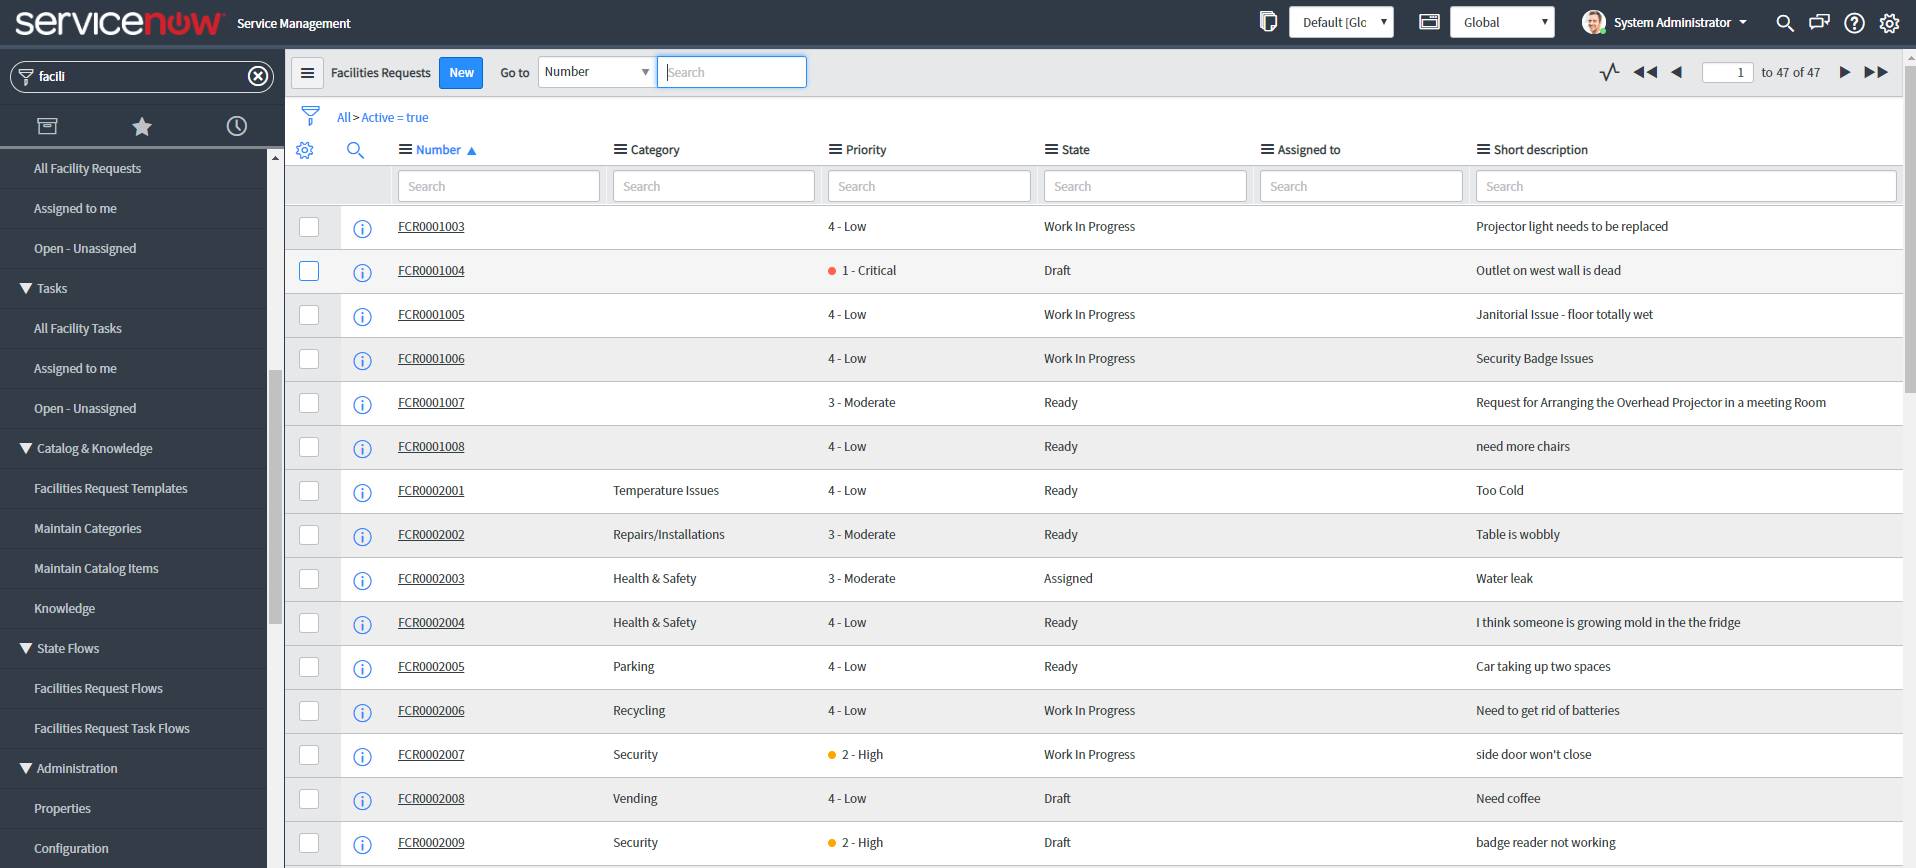 Admin View of ServiceNow Facility Management Requests